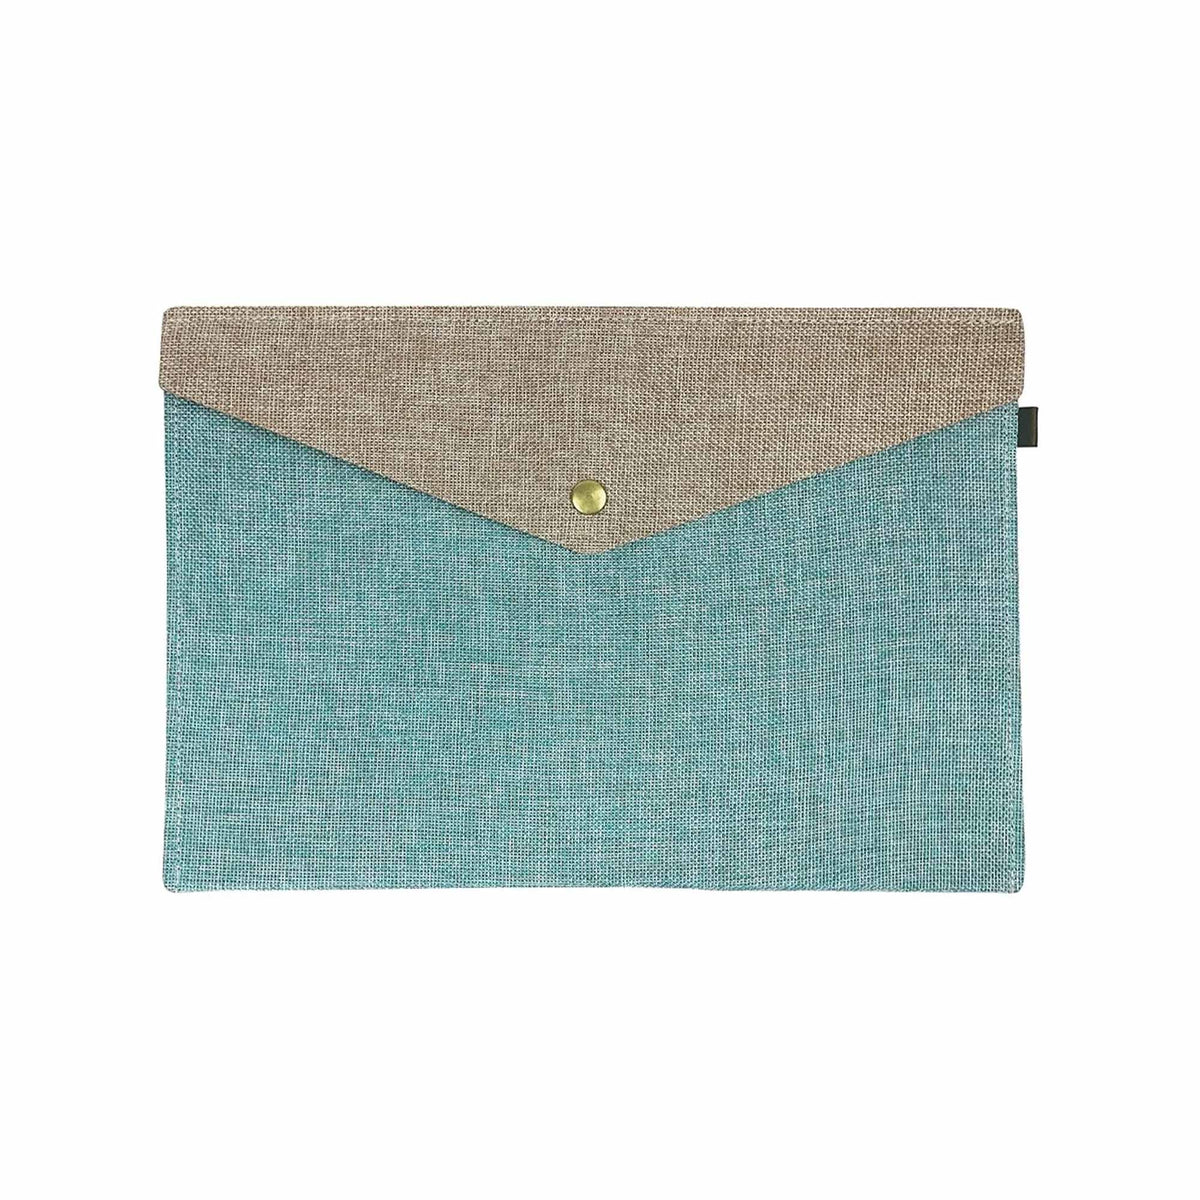 Two Tone Fabric A4 Documents Folder Pouch - Blue & Brown